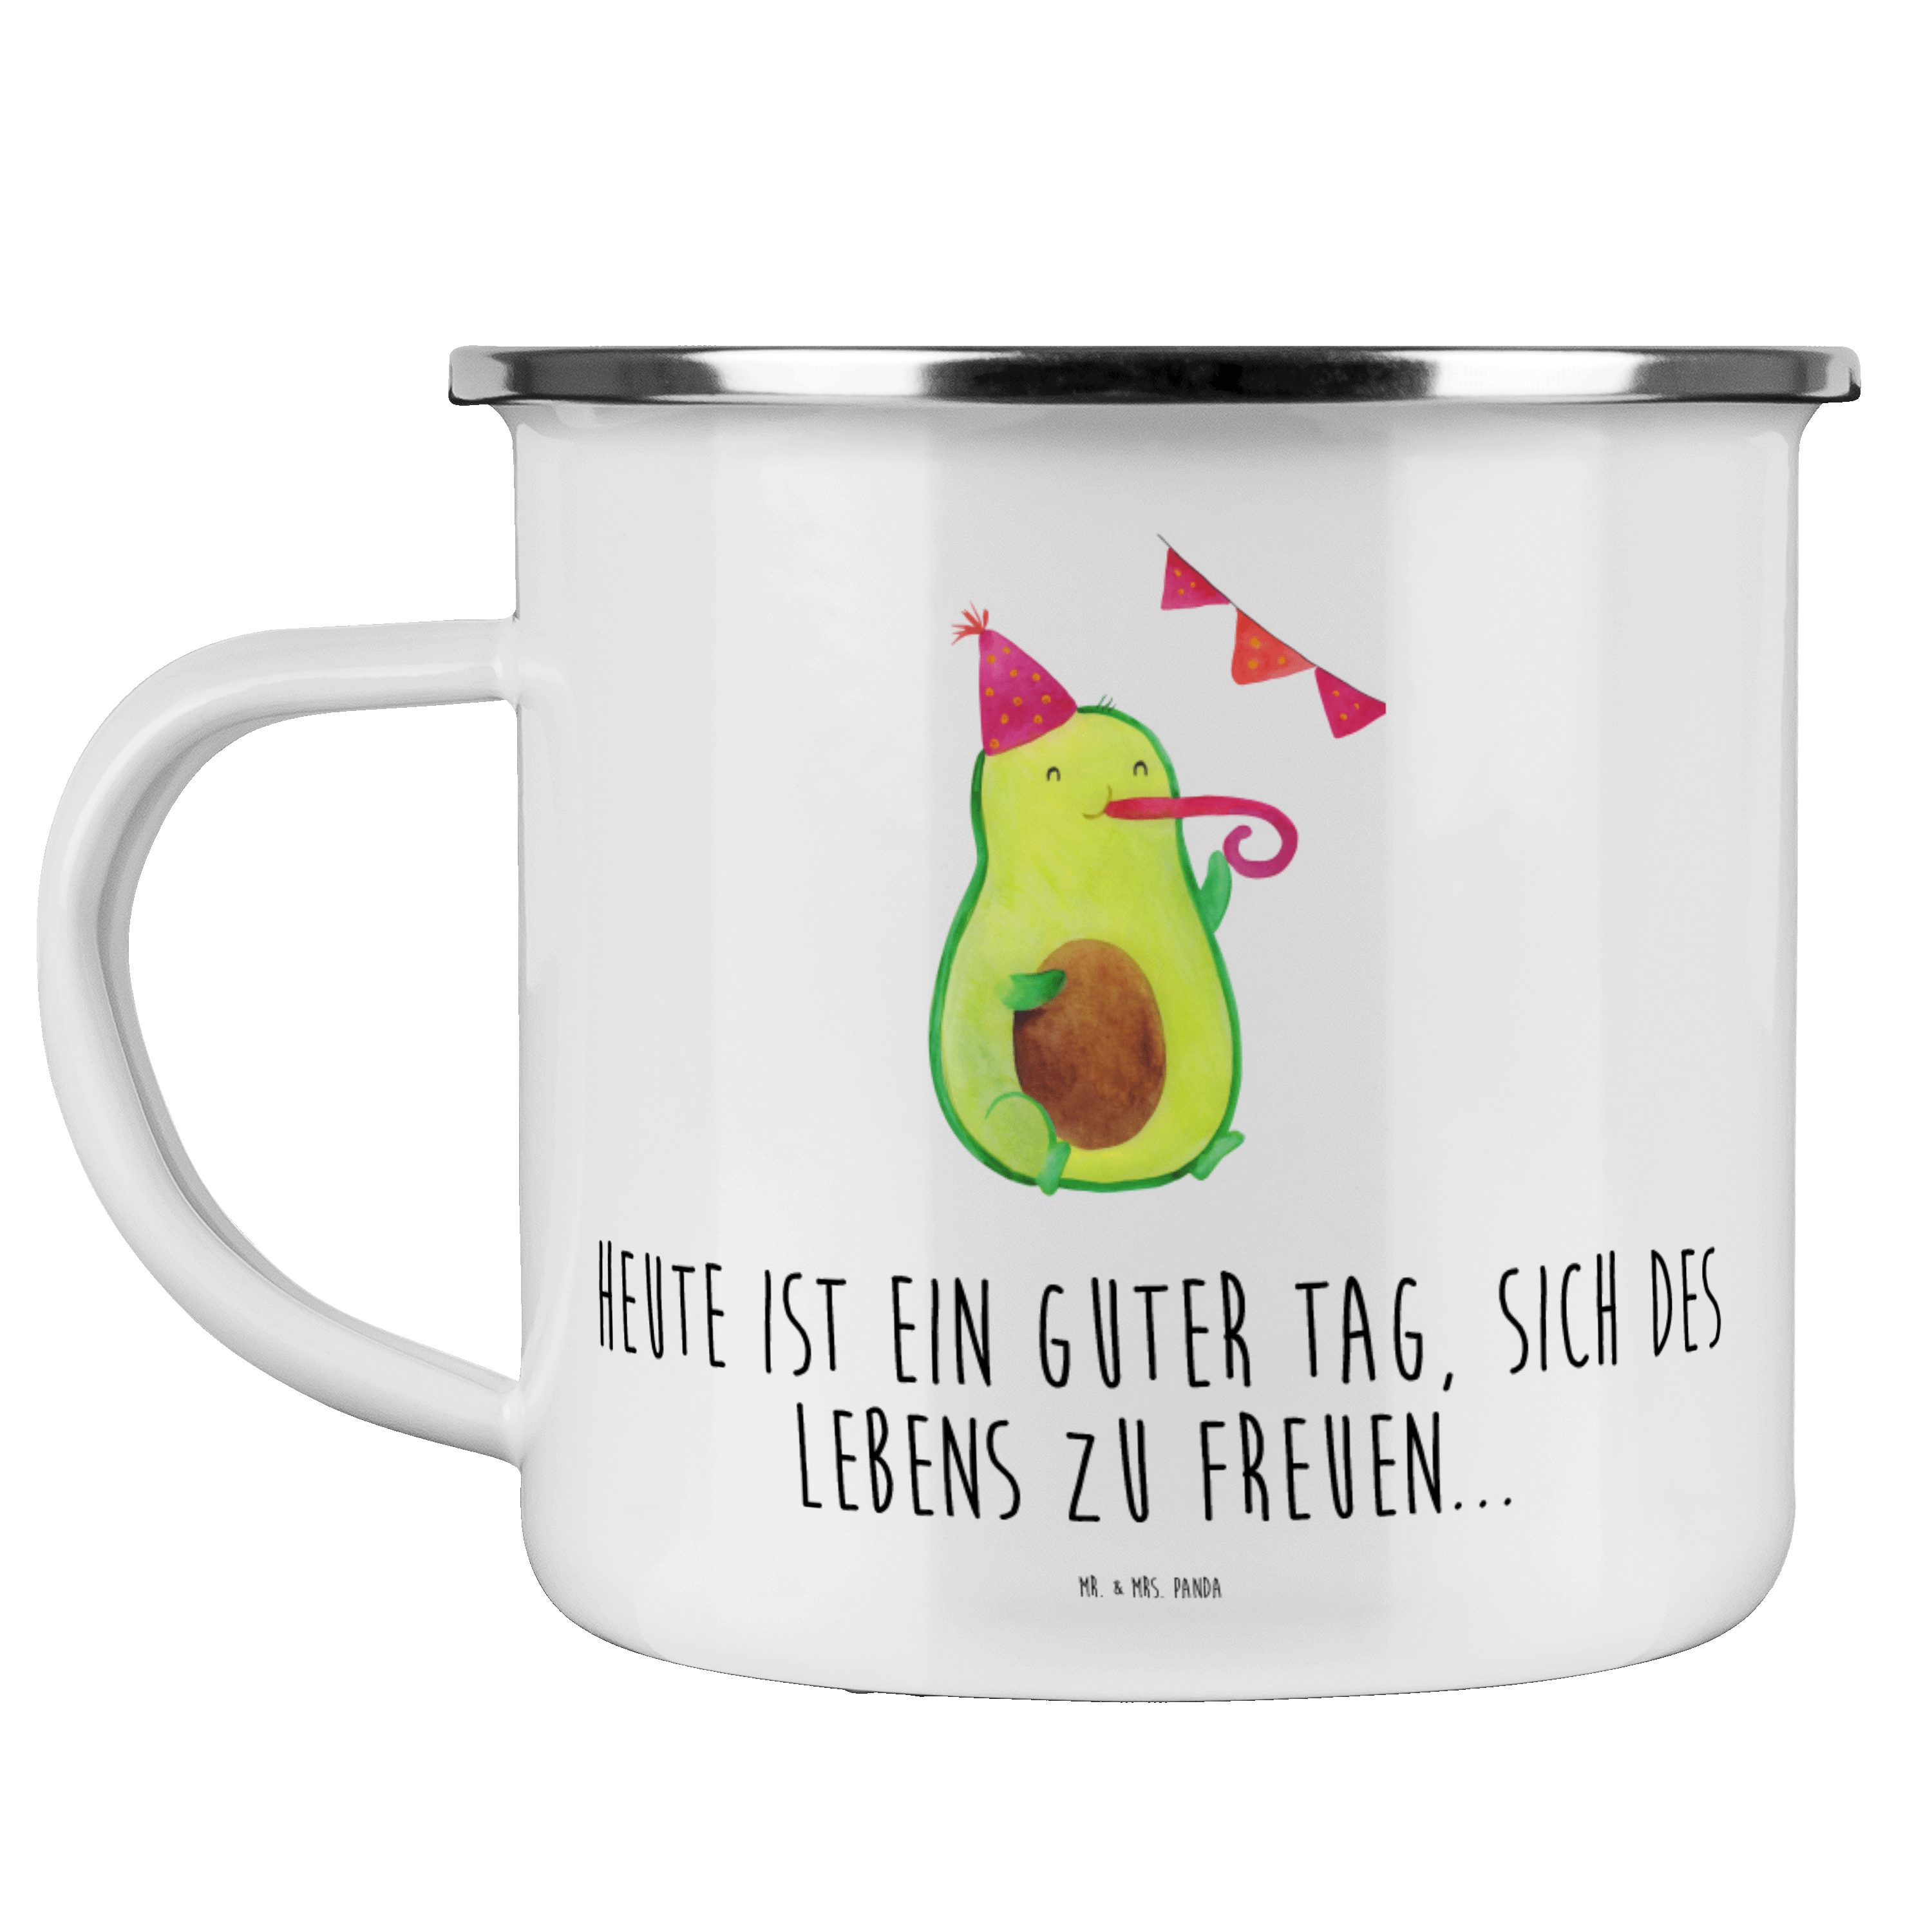 Mr. & Mrs. Panda Becher Avocado Party - Weiß - Geschenk, Emaille Campingbecher, Emaille Trink, Emaille